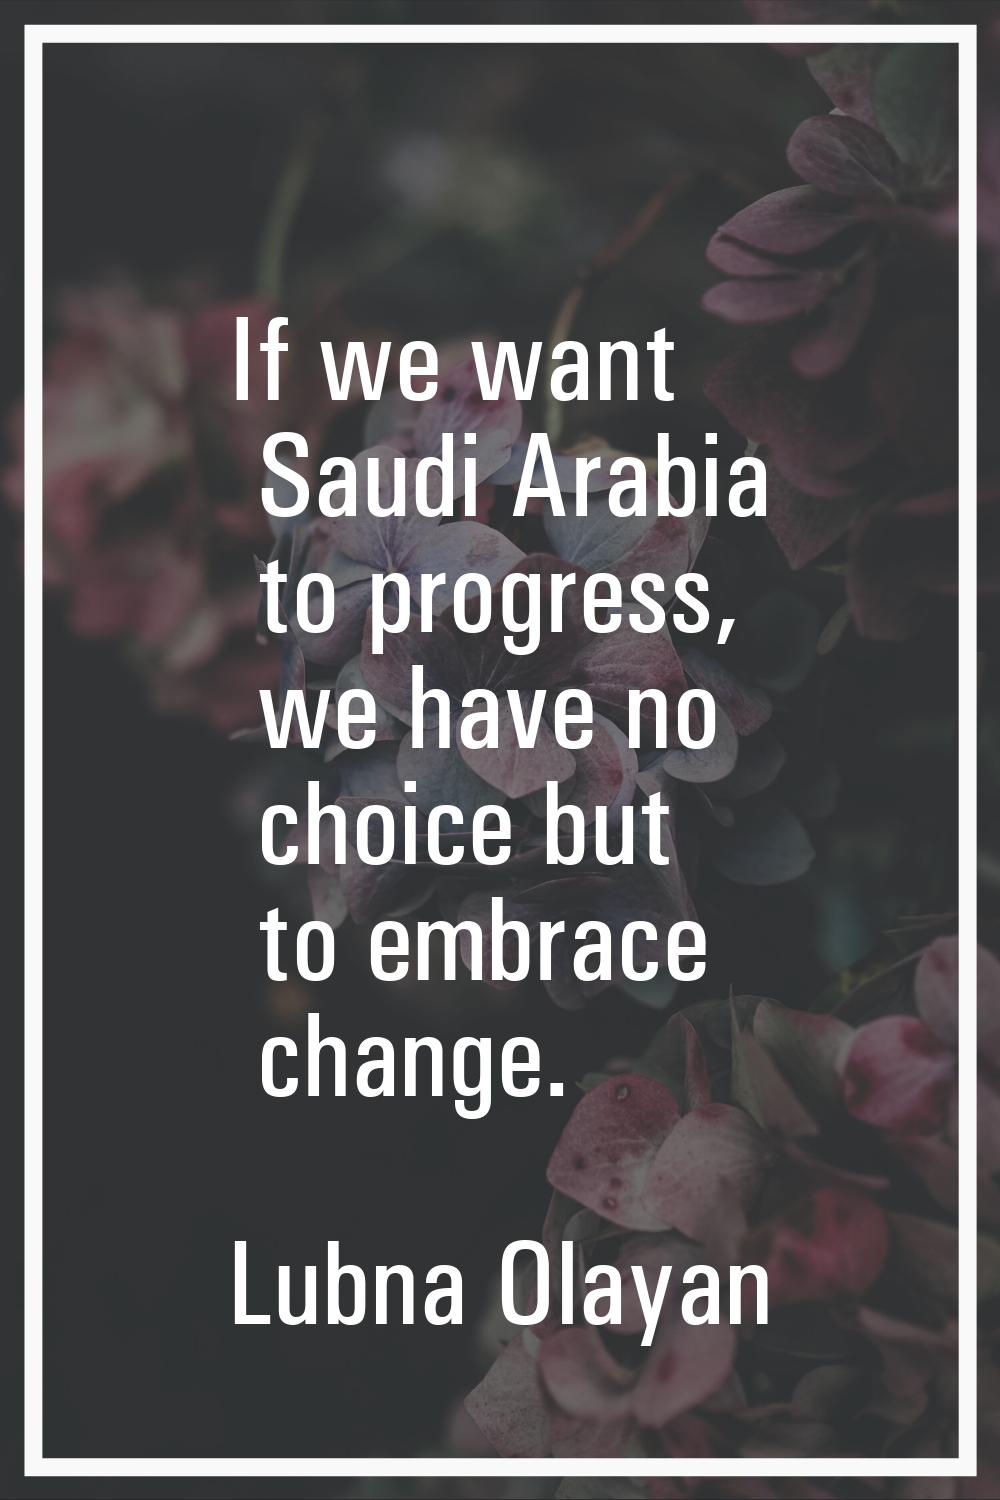 If we want Saudi Arabia to progress, we have no choice but to embrace change.